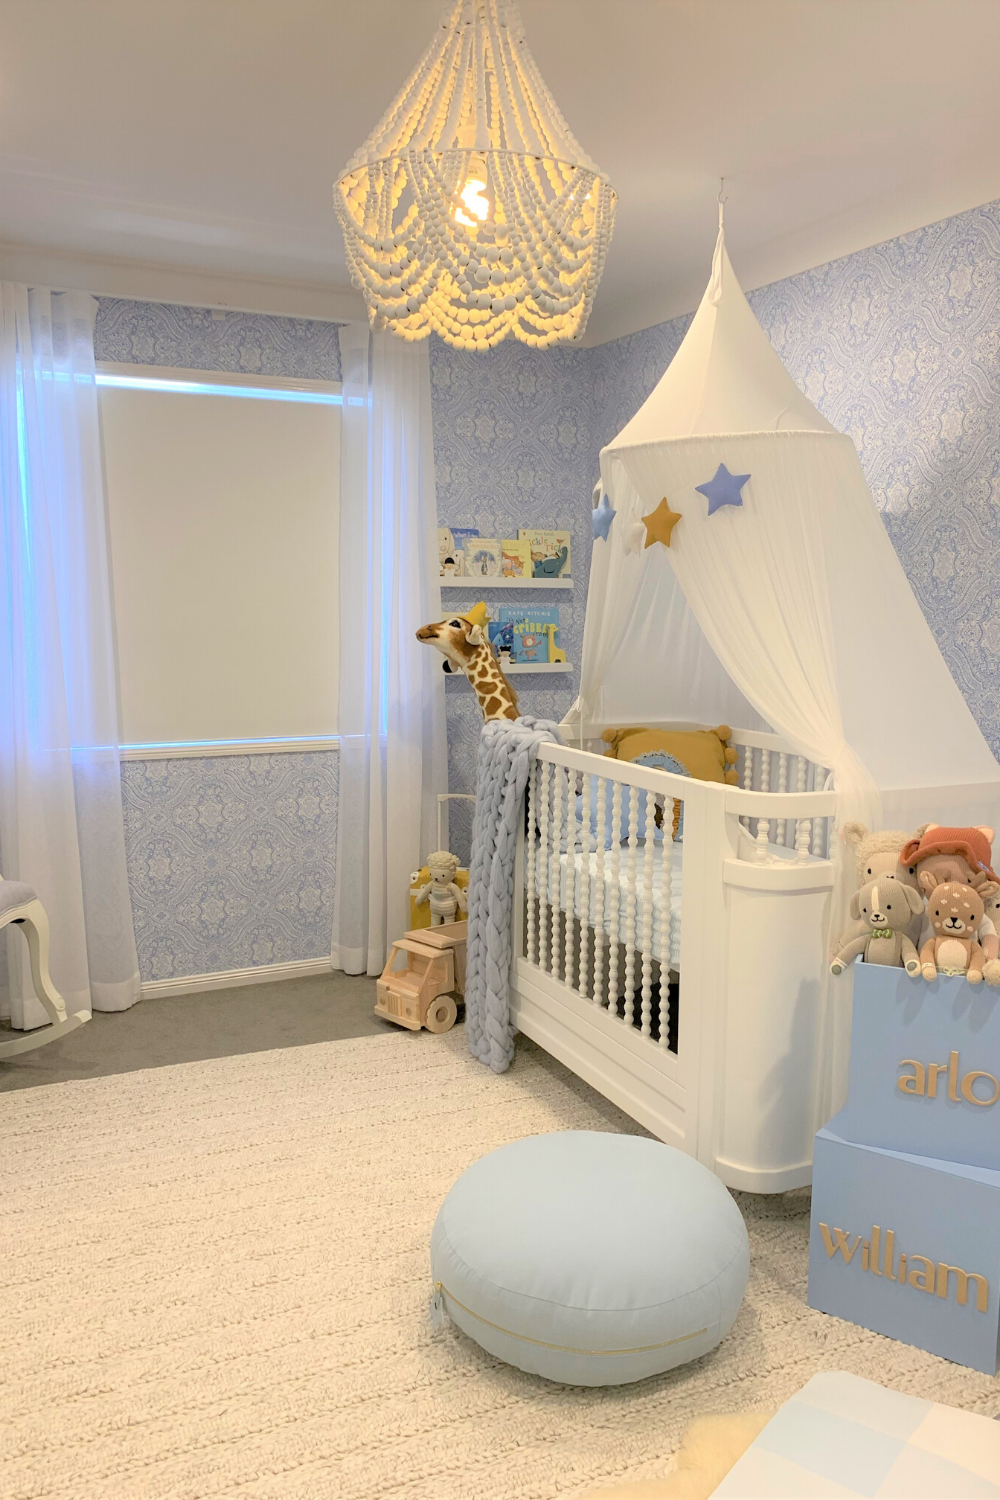 A nursery with blinds and curtains - Nursery Blinds Blog Featured Image